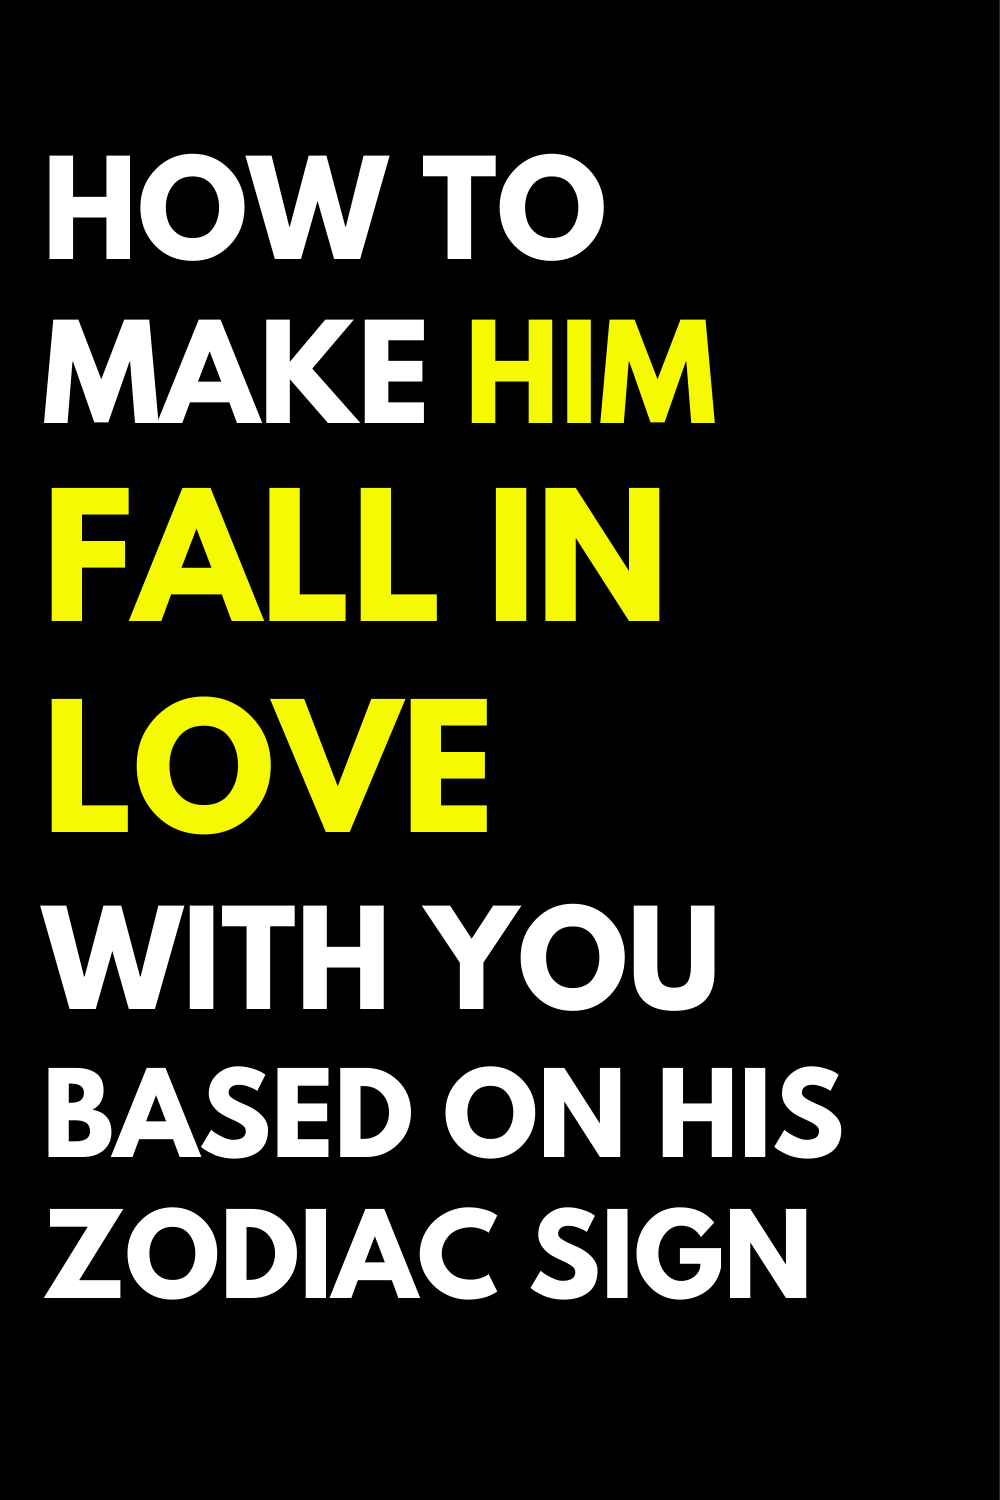 How To Make Him Fall In Love With You Based On His Zodiac Sign